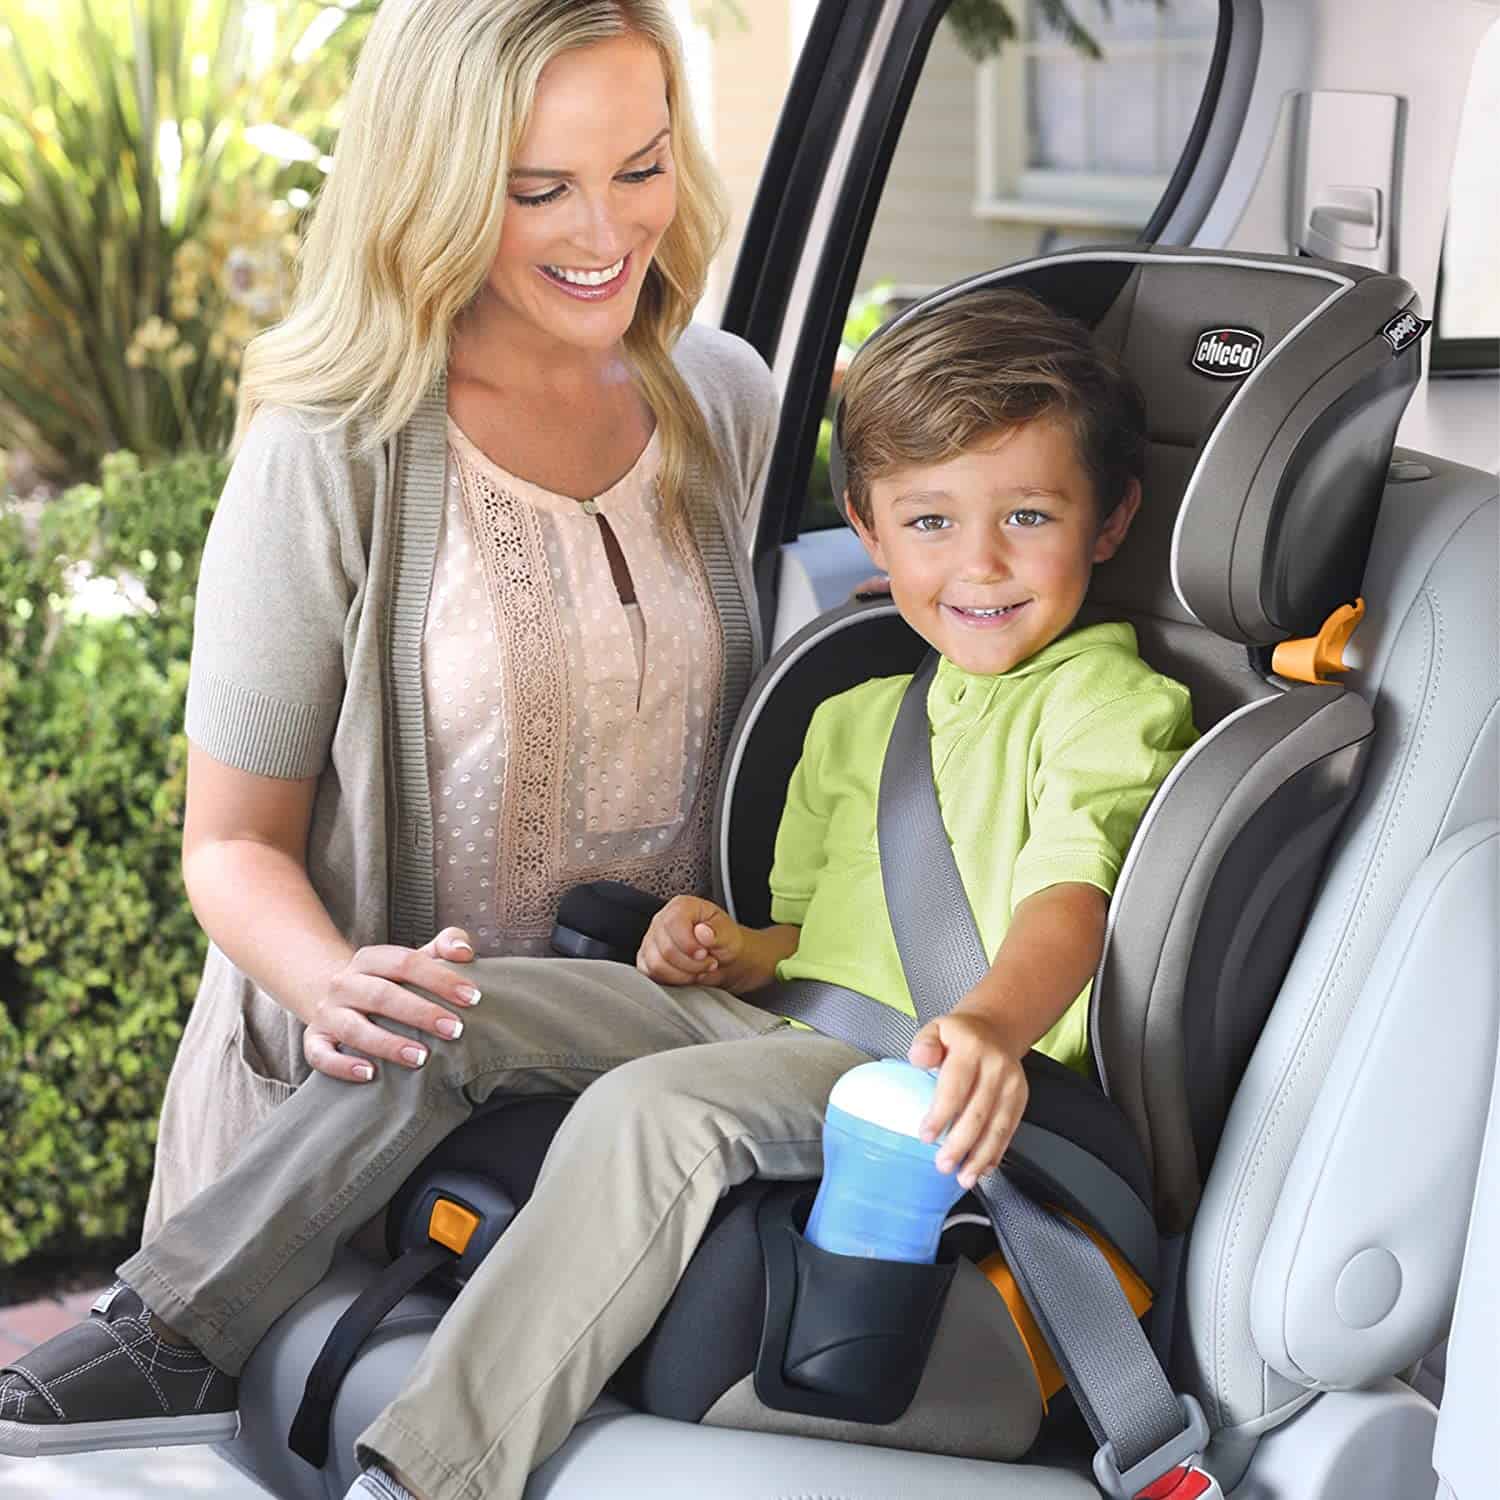 Best Narrow Booster Car Seats for Baby Expert Reviews & Guide